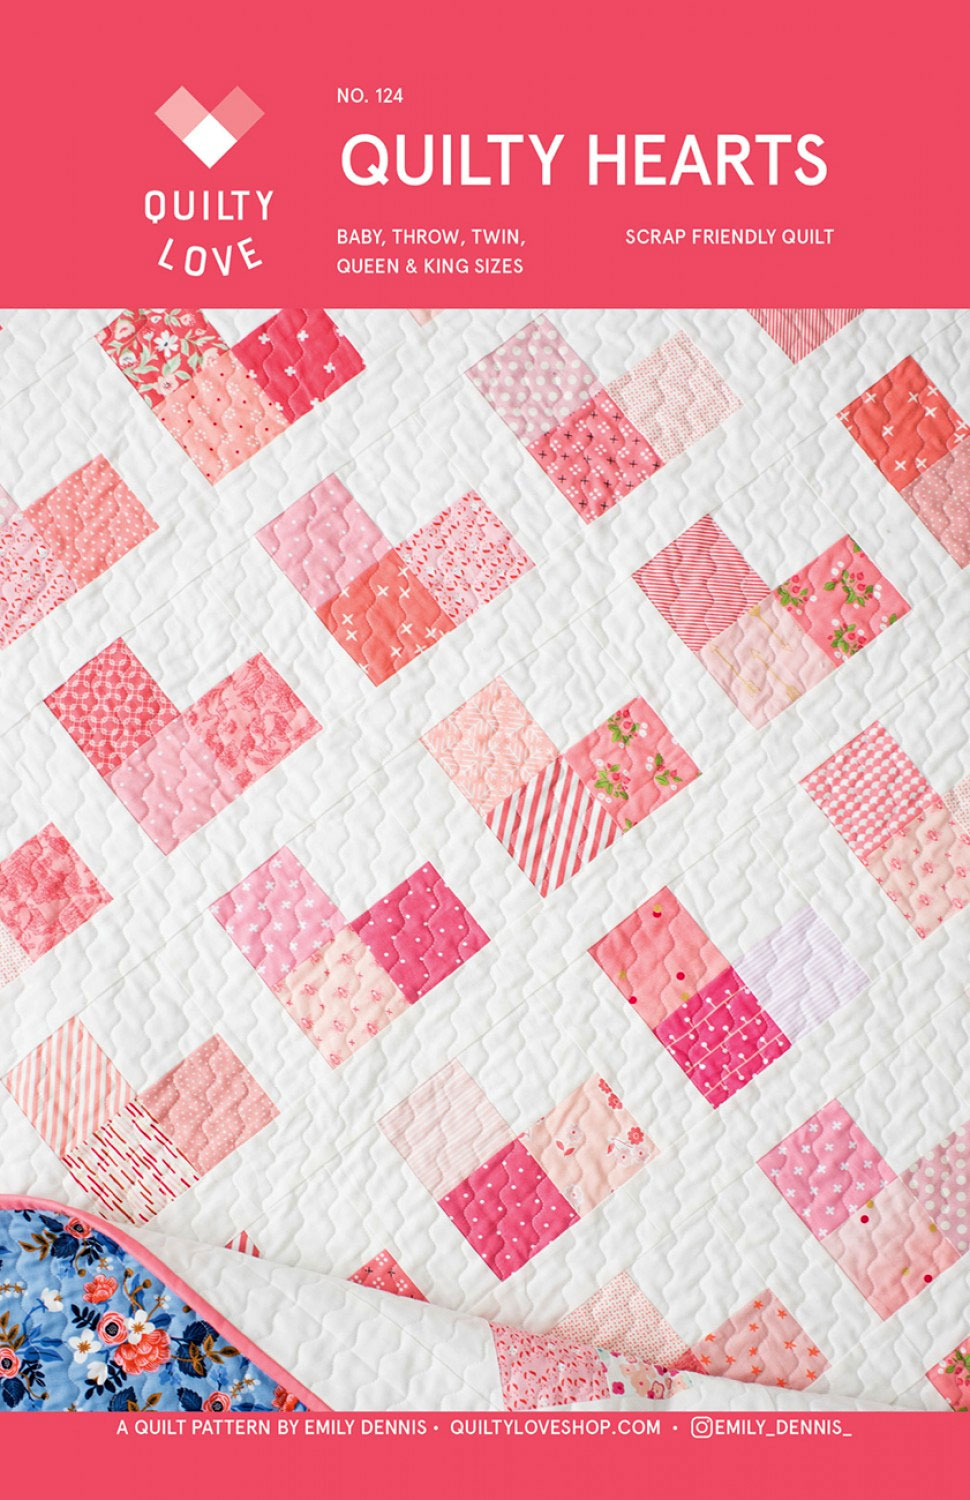 Quilty-Hearts-quilt-sewing-pattern-from-Quilty-Love-front